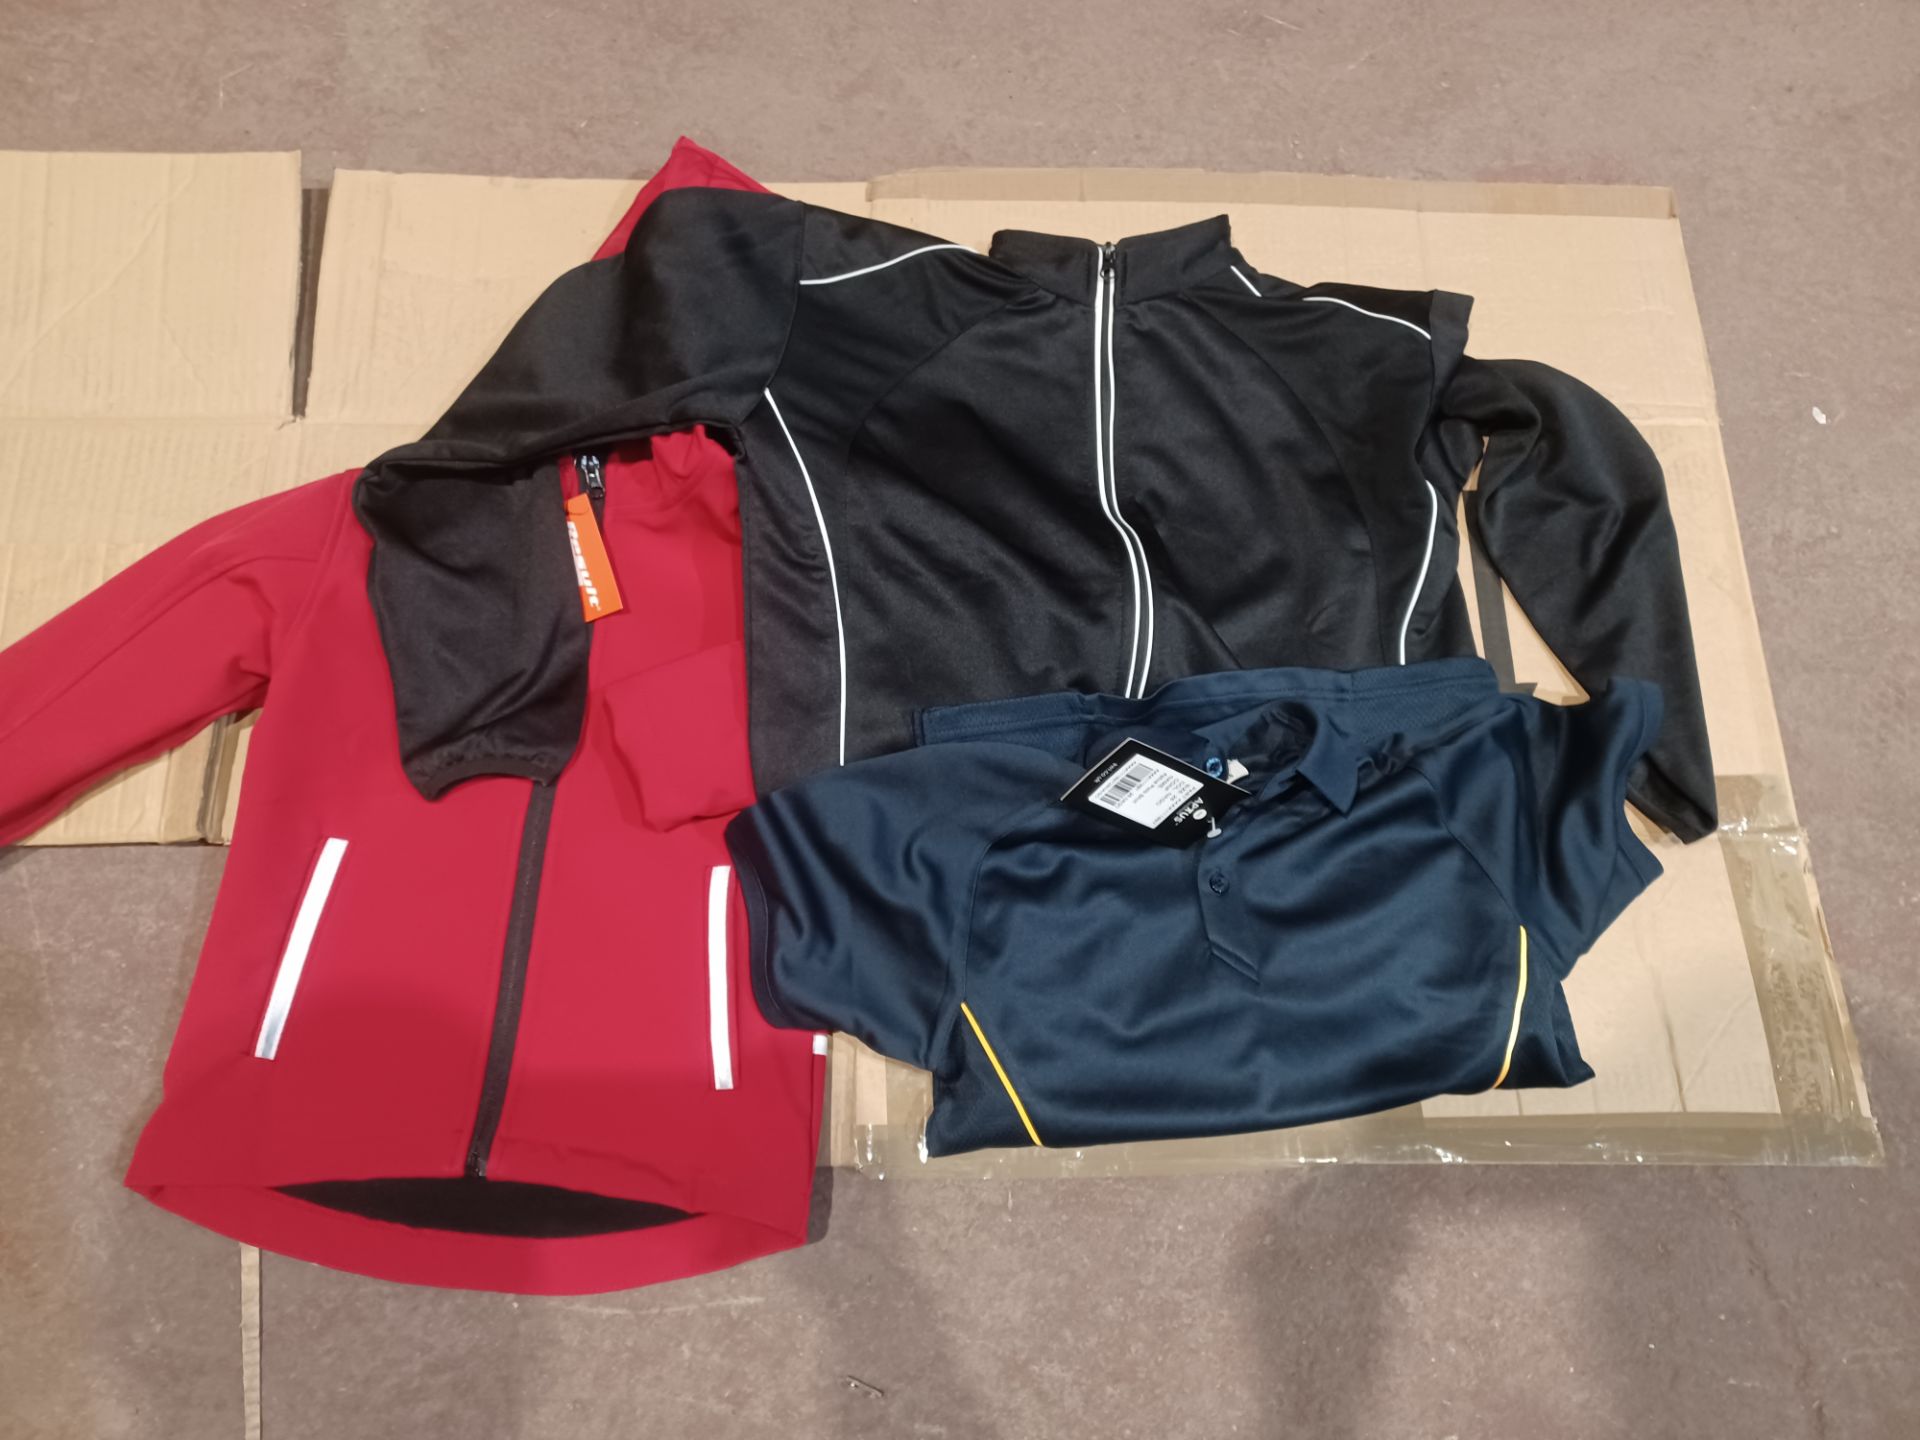 17 x Mixed Lot Clothing to include Jackets, Shorts, Tops and more in various Sizes and colours -